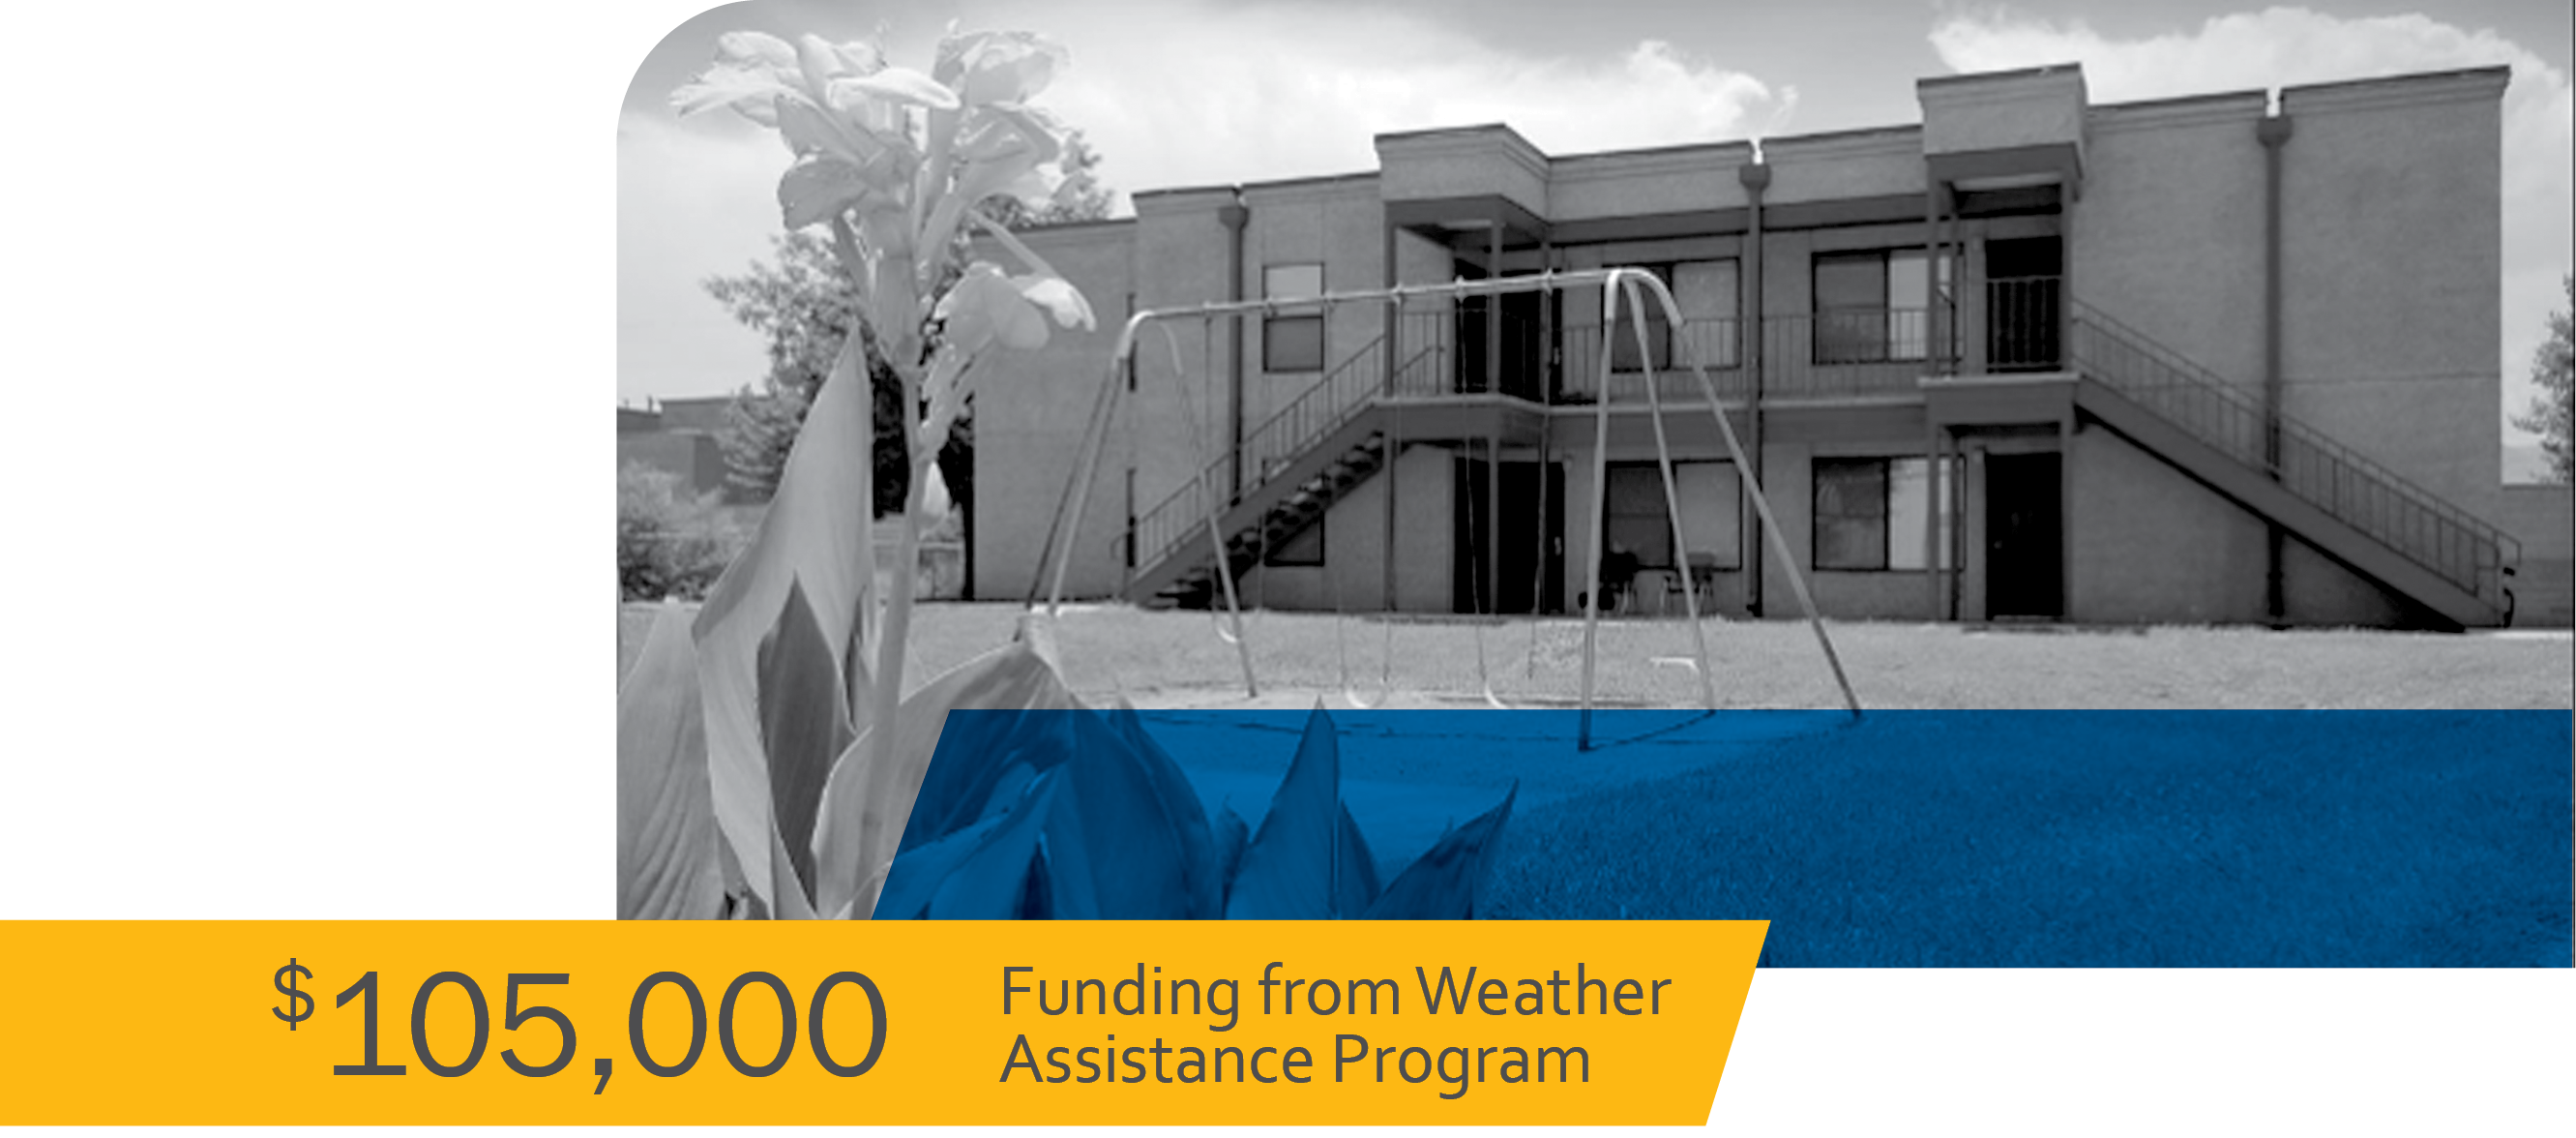 $105,000 Funding from Weather Assistance Program